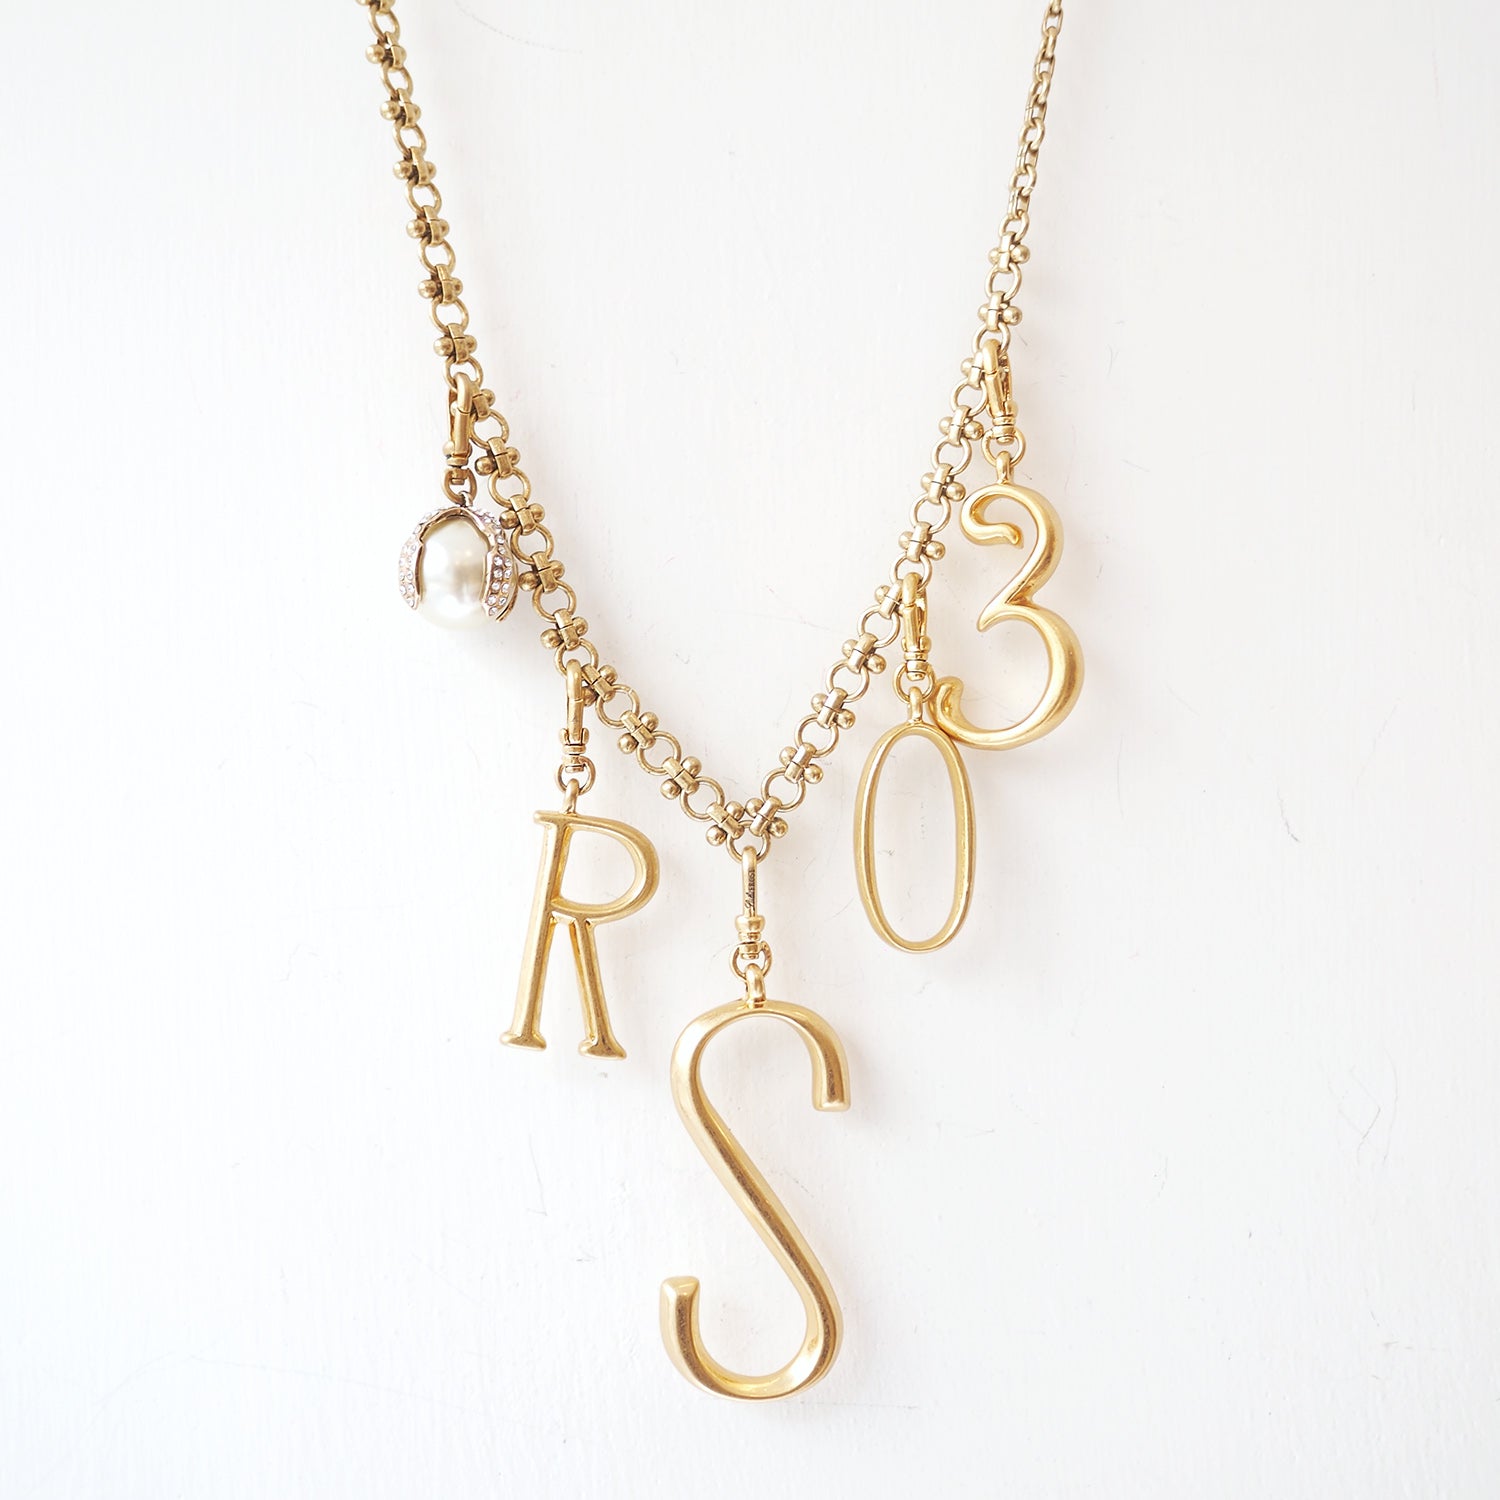 Lulu Frost Plaza Letters in a smaller version of the original font from New York's iconic Plaza Hotel. Pair with one of the Plaza chain bases and add additional charms to create a special piece all your own. 